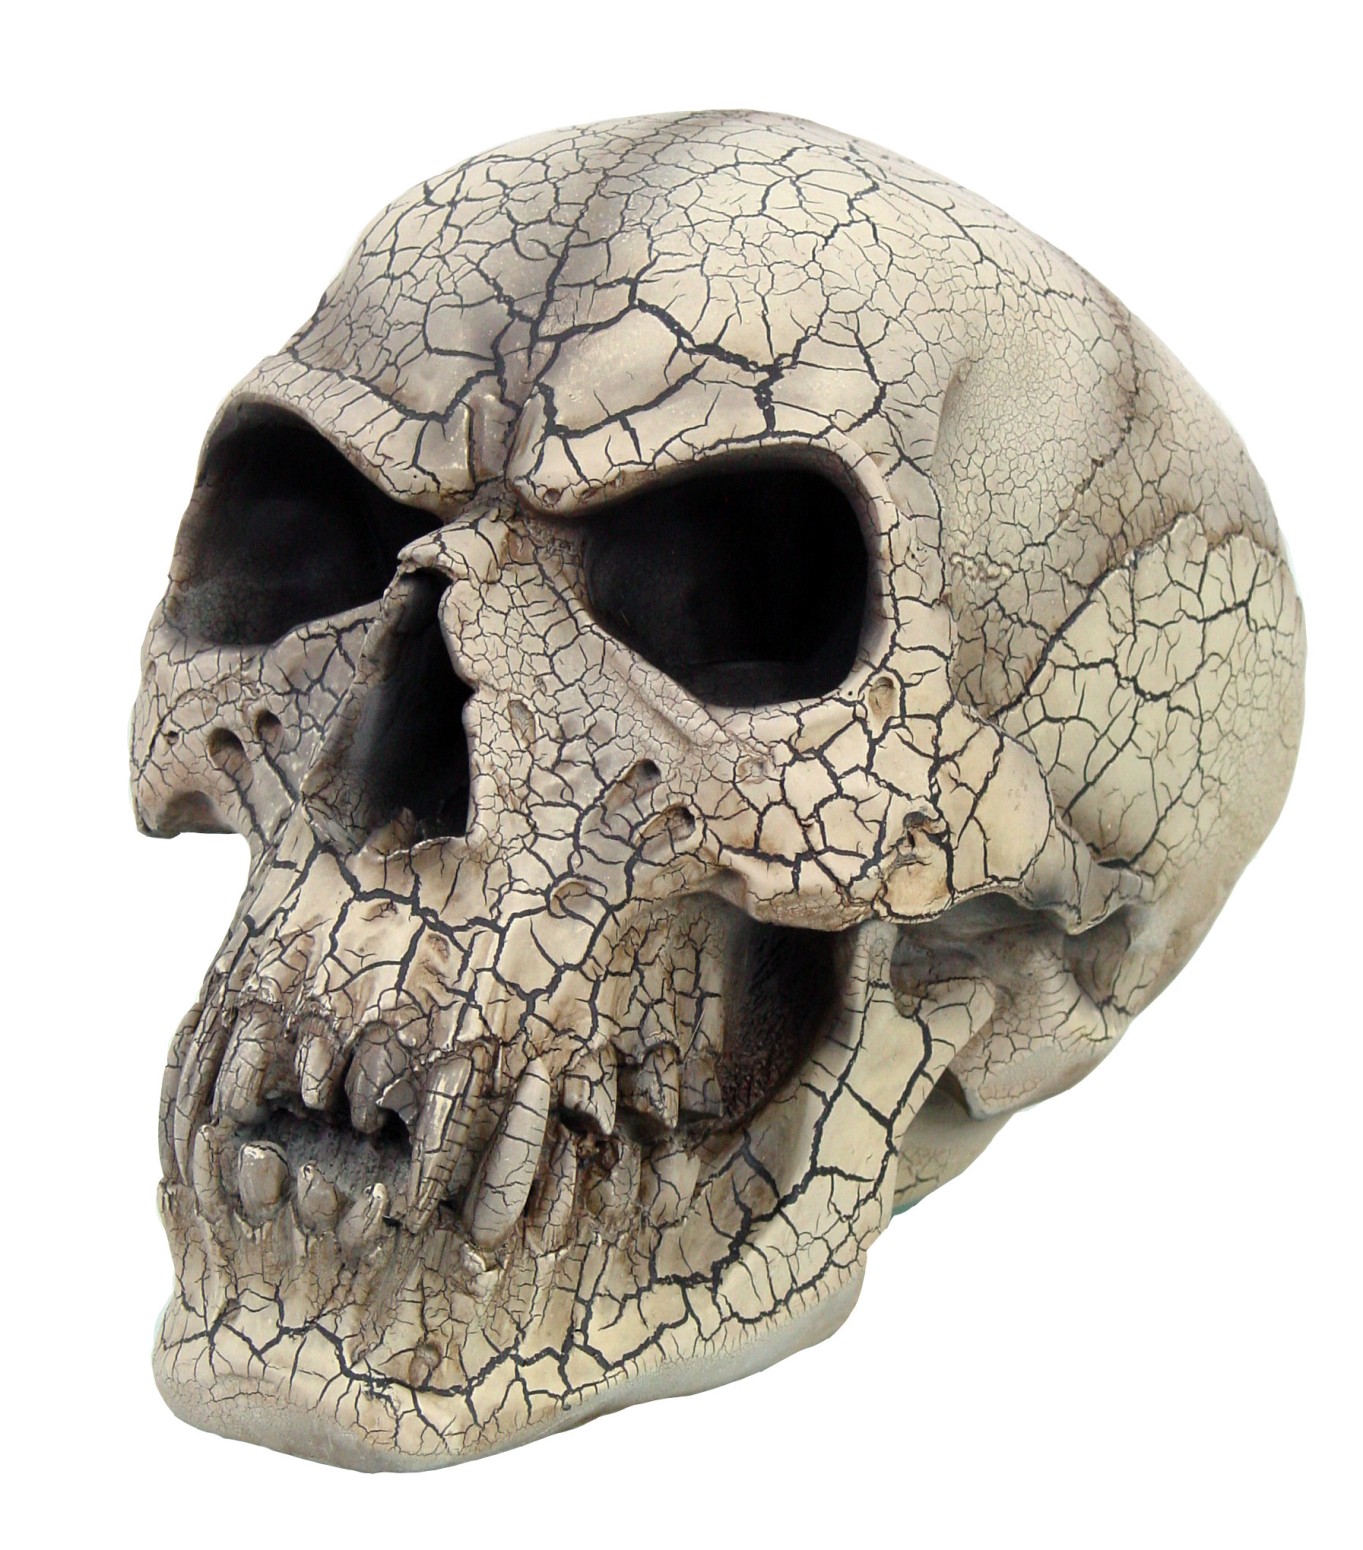 Vampire Skull wth Fractures - Click Image to Close